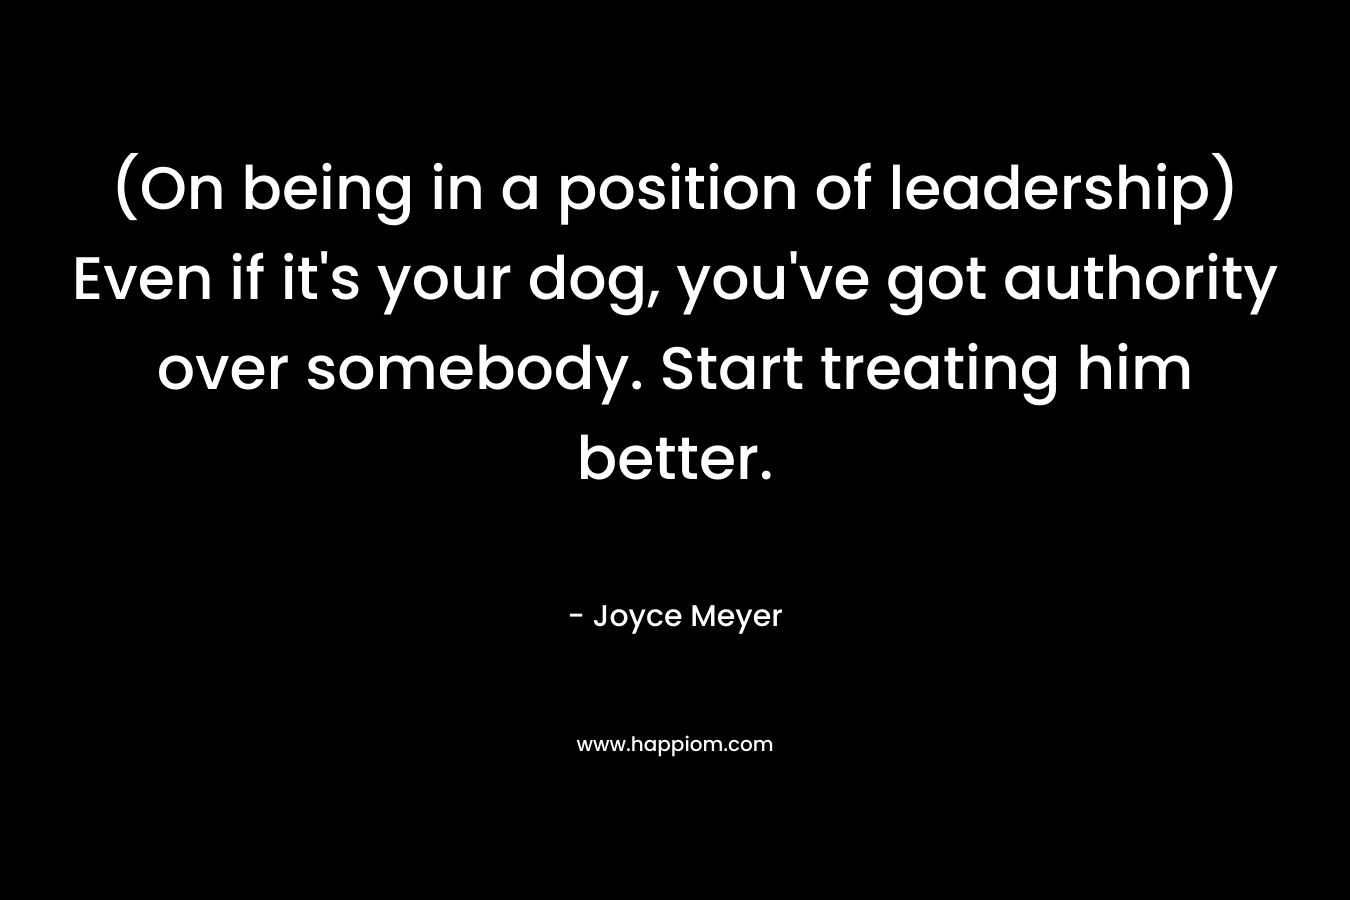 (On being in a position of leadership) Even if it's your dog, you've got authority over somebody. Start treating him better.